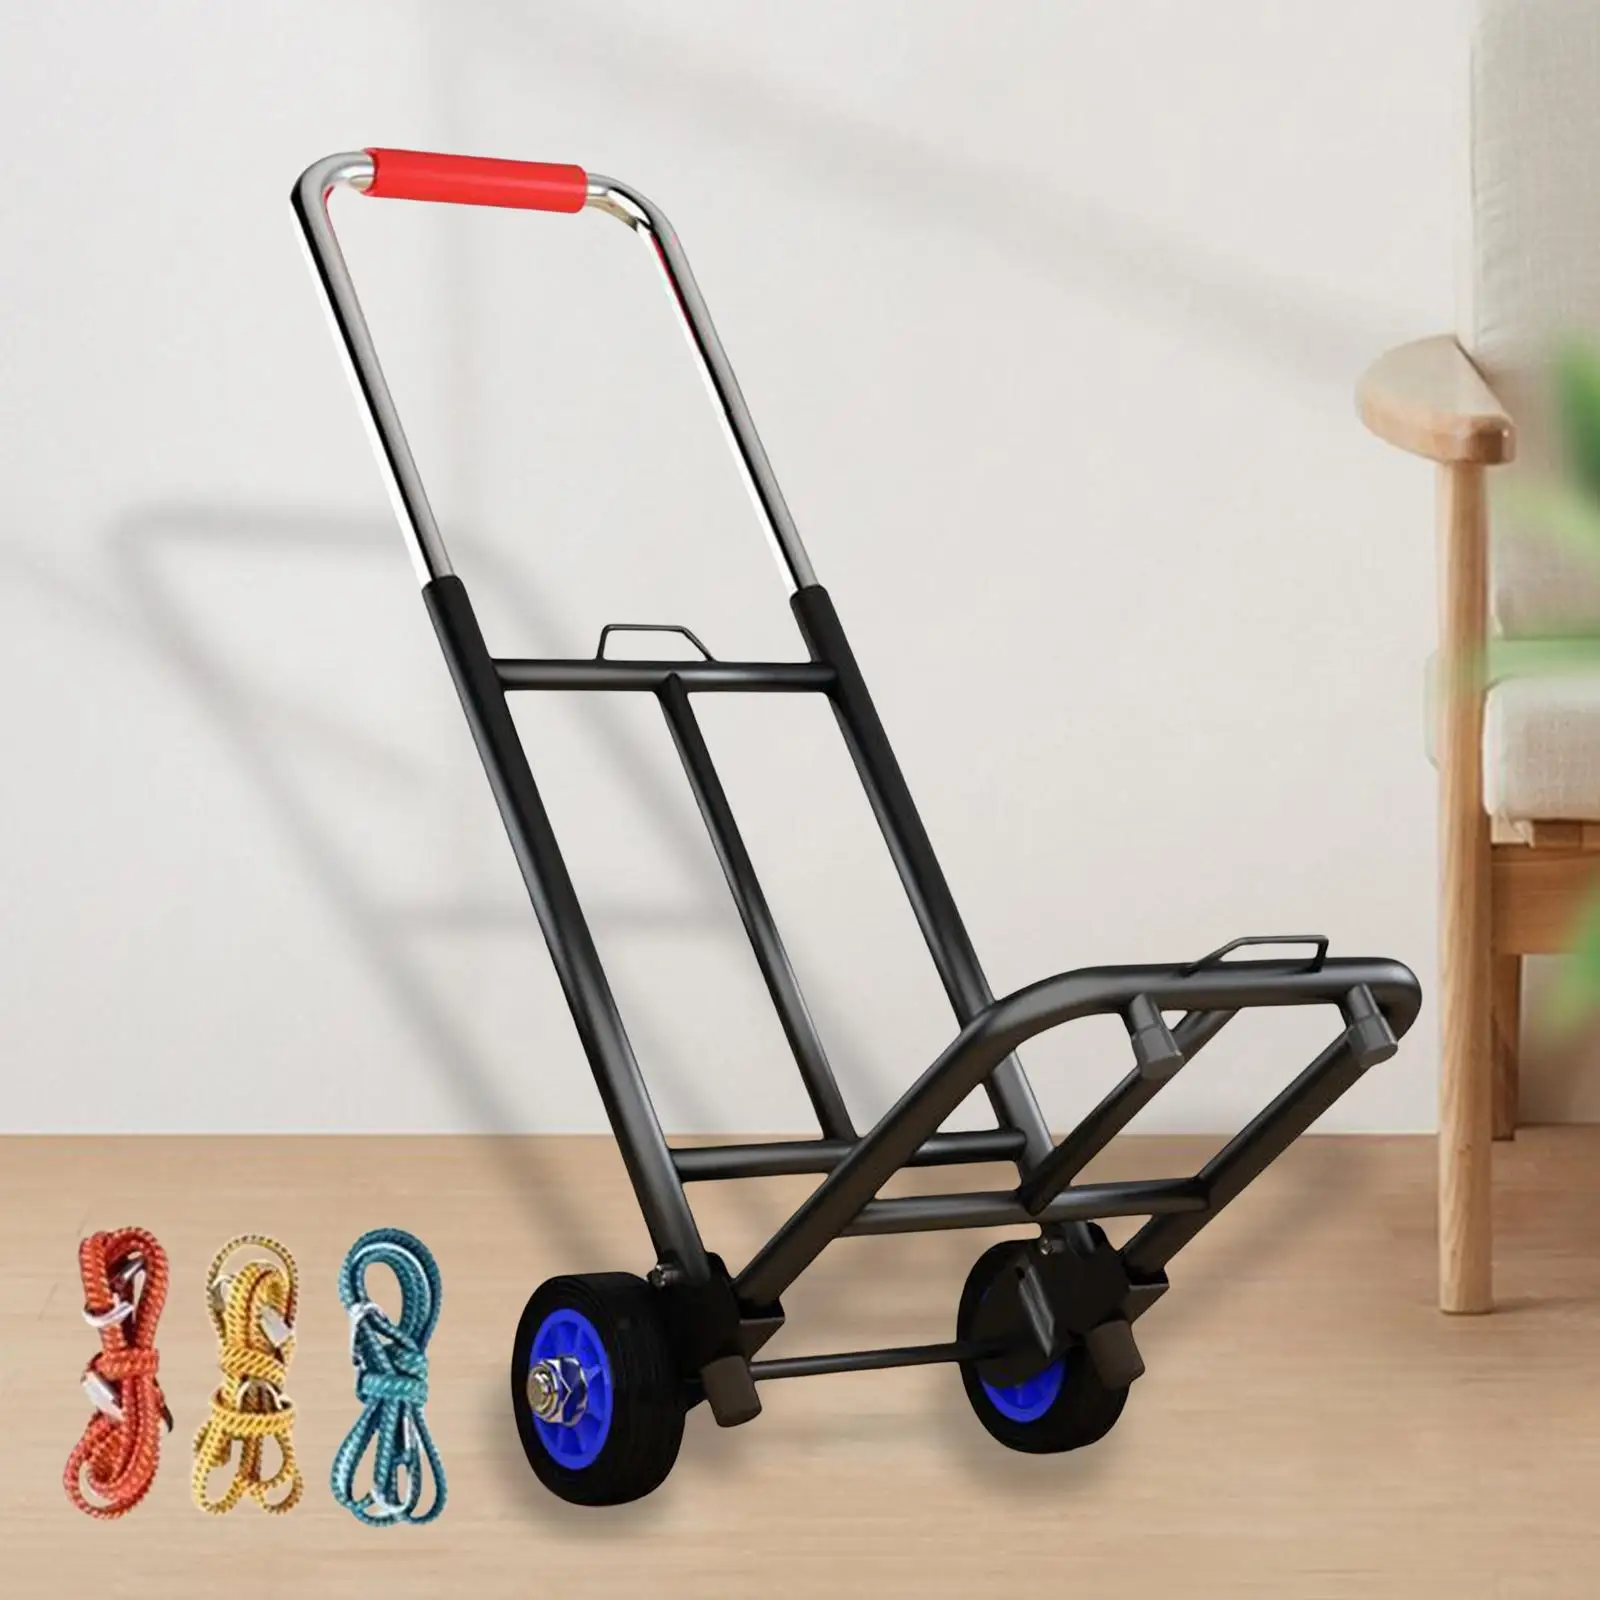 Foldable Hand Truck Dolly Adjustable Handle for Shopping, Office Portable